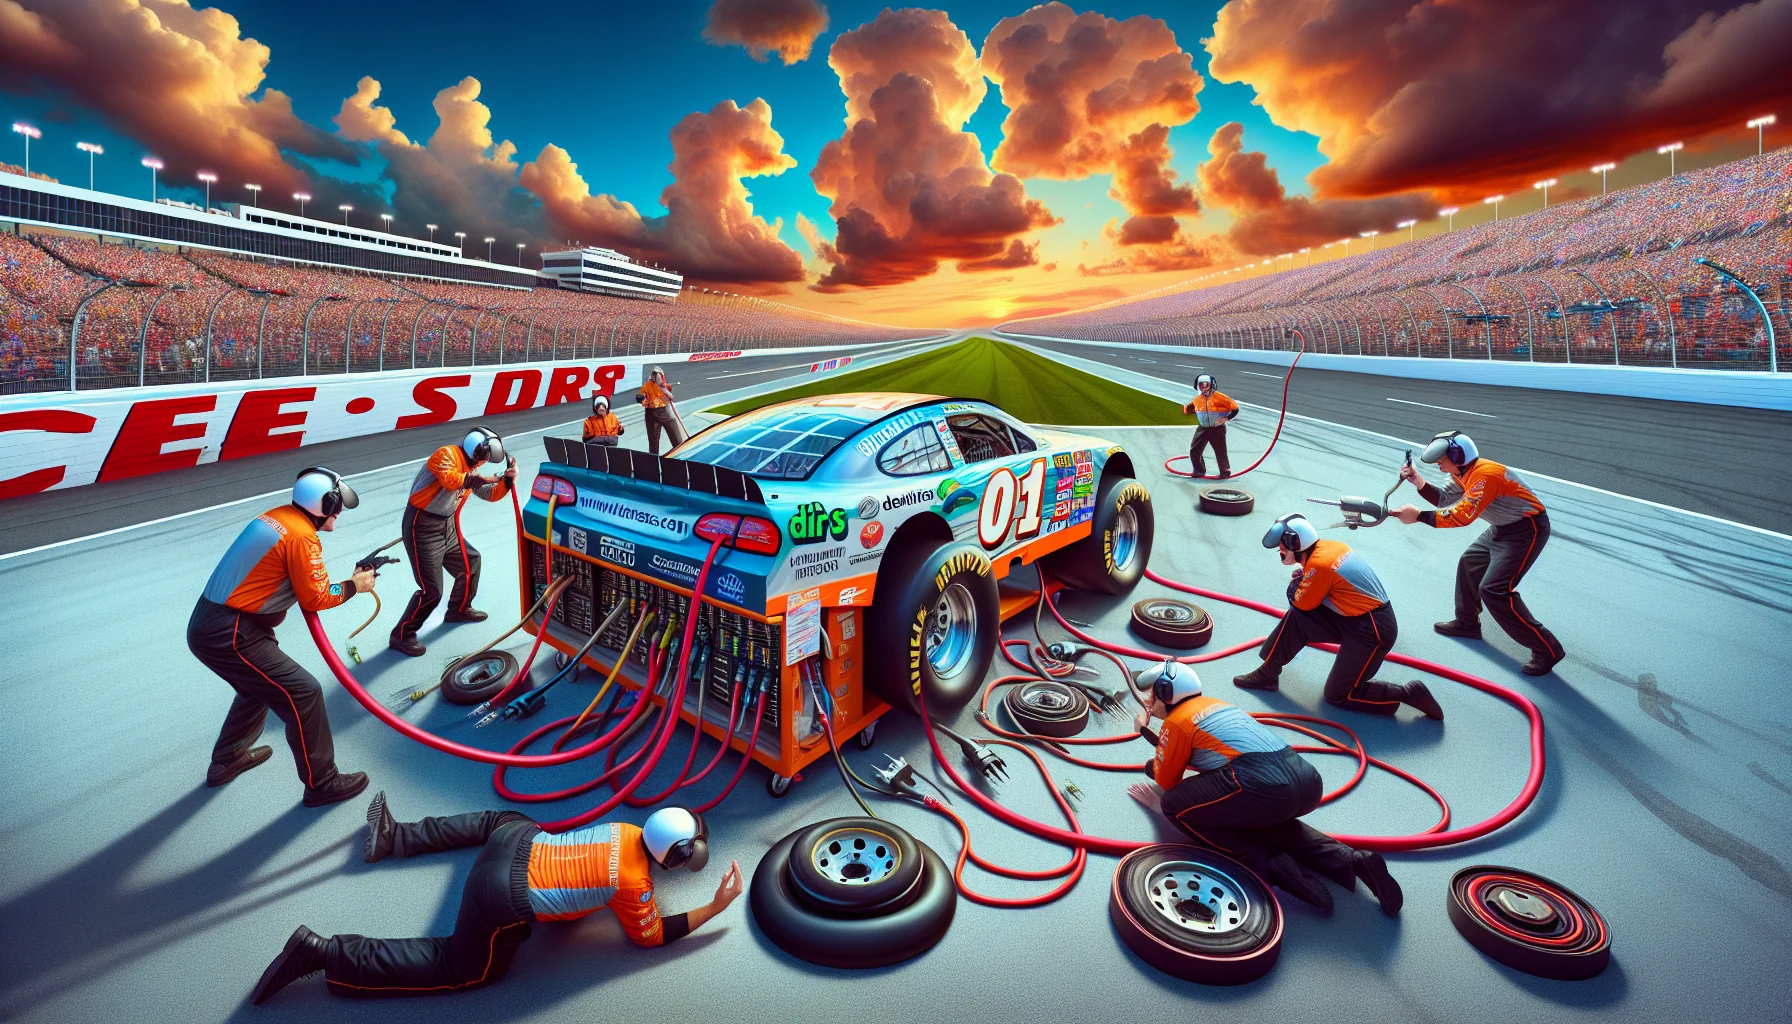 Create an image of a comical scene at a NASCAR event, portraying hilarious mishaps related to web hosting. In the center of the track is a racing car with a paint job that humorously represents the different aspects of web hosting, like servers and databases. The pit crew beside the track are playfully struggling with network cables as if they were air hoses for tyres, while another crew member is looking confusedly at a giant plug. Spectators in the stands are laughing and pointing, their gestures highlighting the comic absurdity of the situation. The sky above is breathtakingly vibrant, massed with fluffy clouds tinged with the colours of sunset.